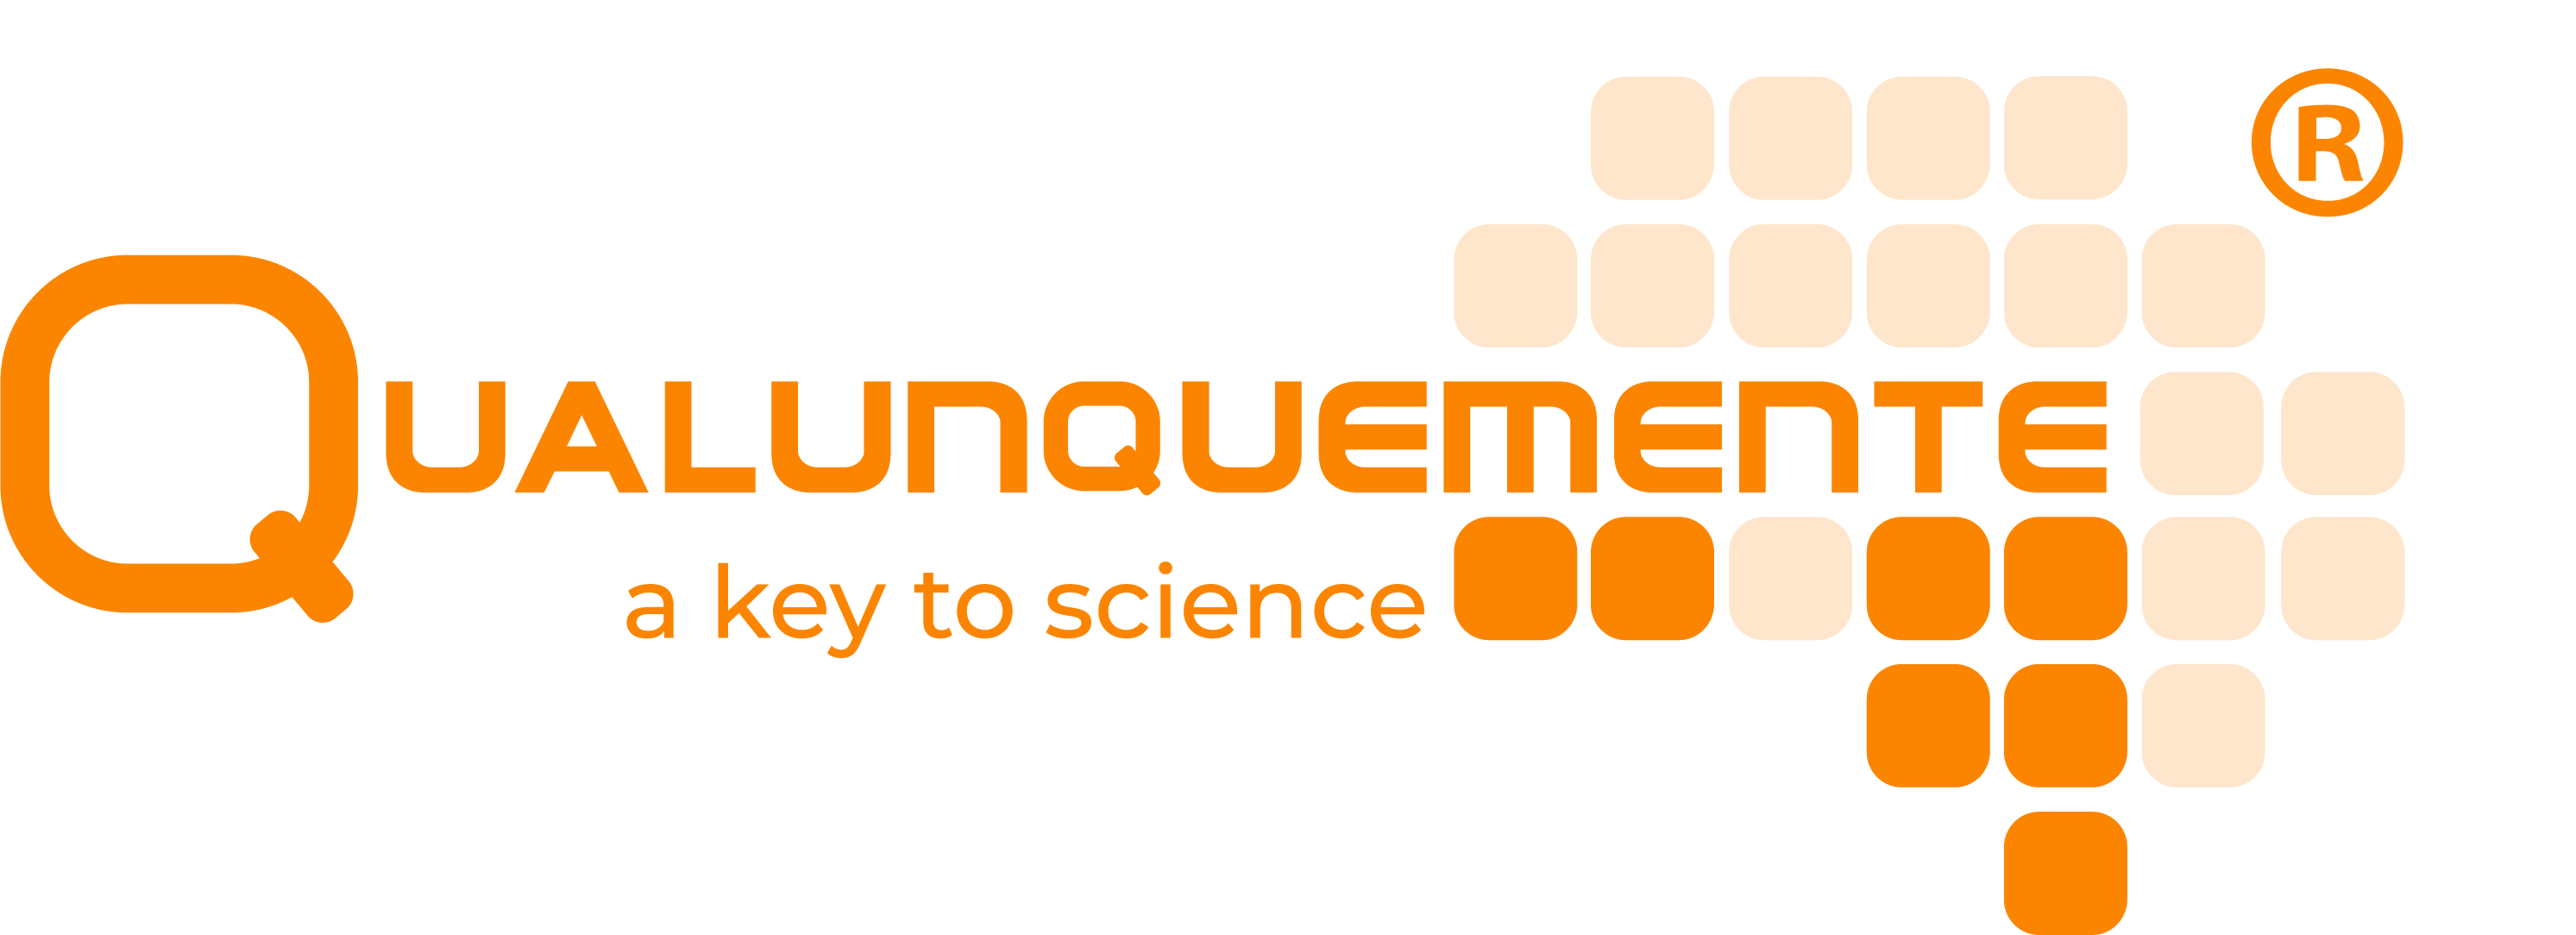 Qualunquemente a key to science logo all rights reserved